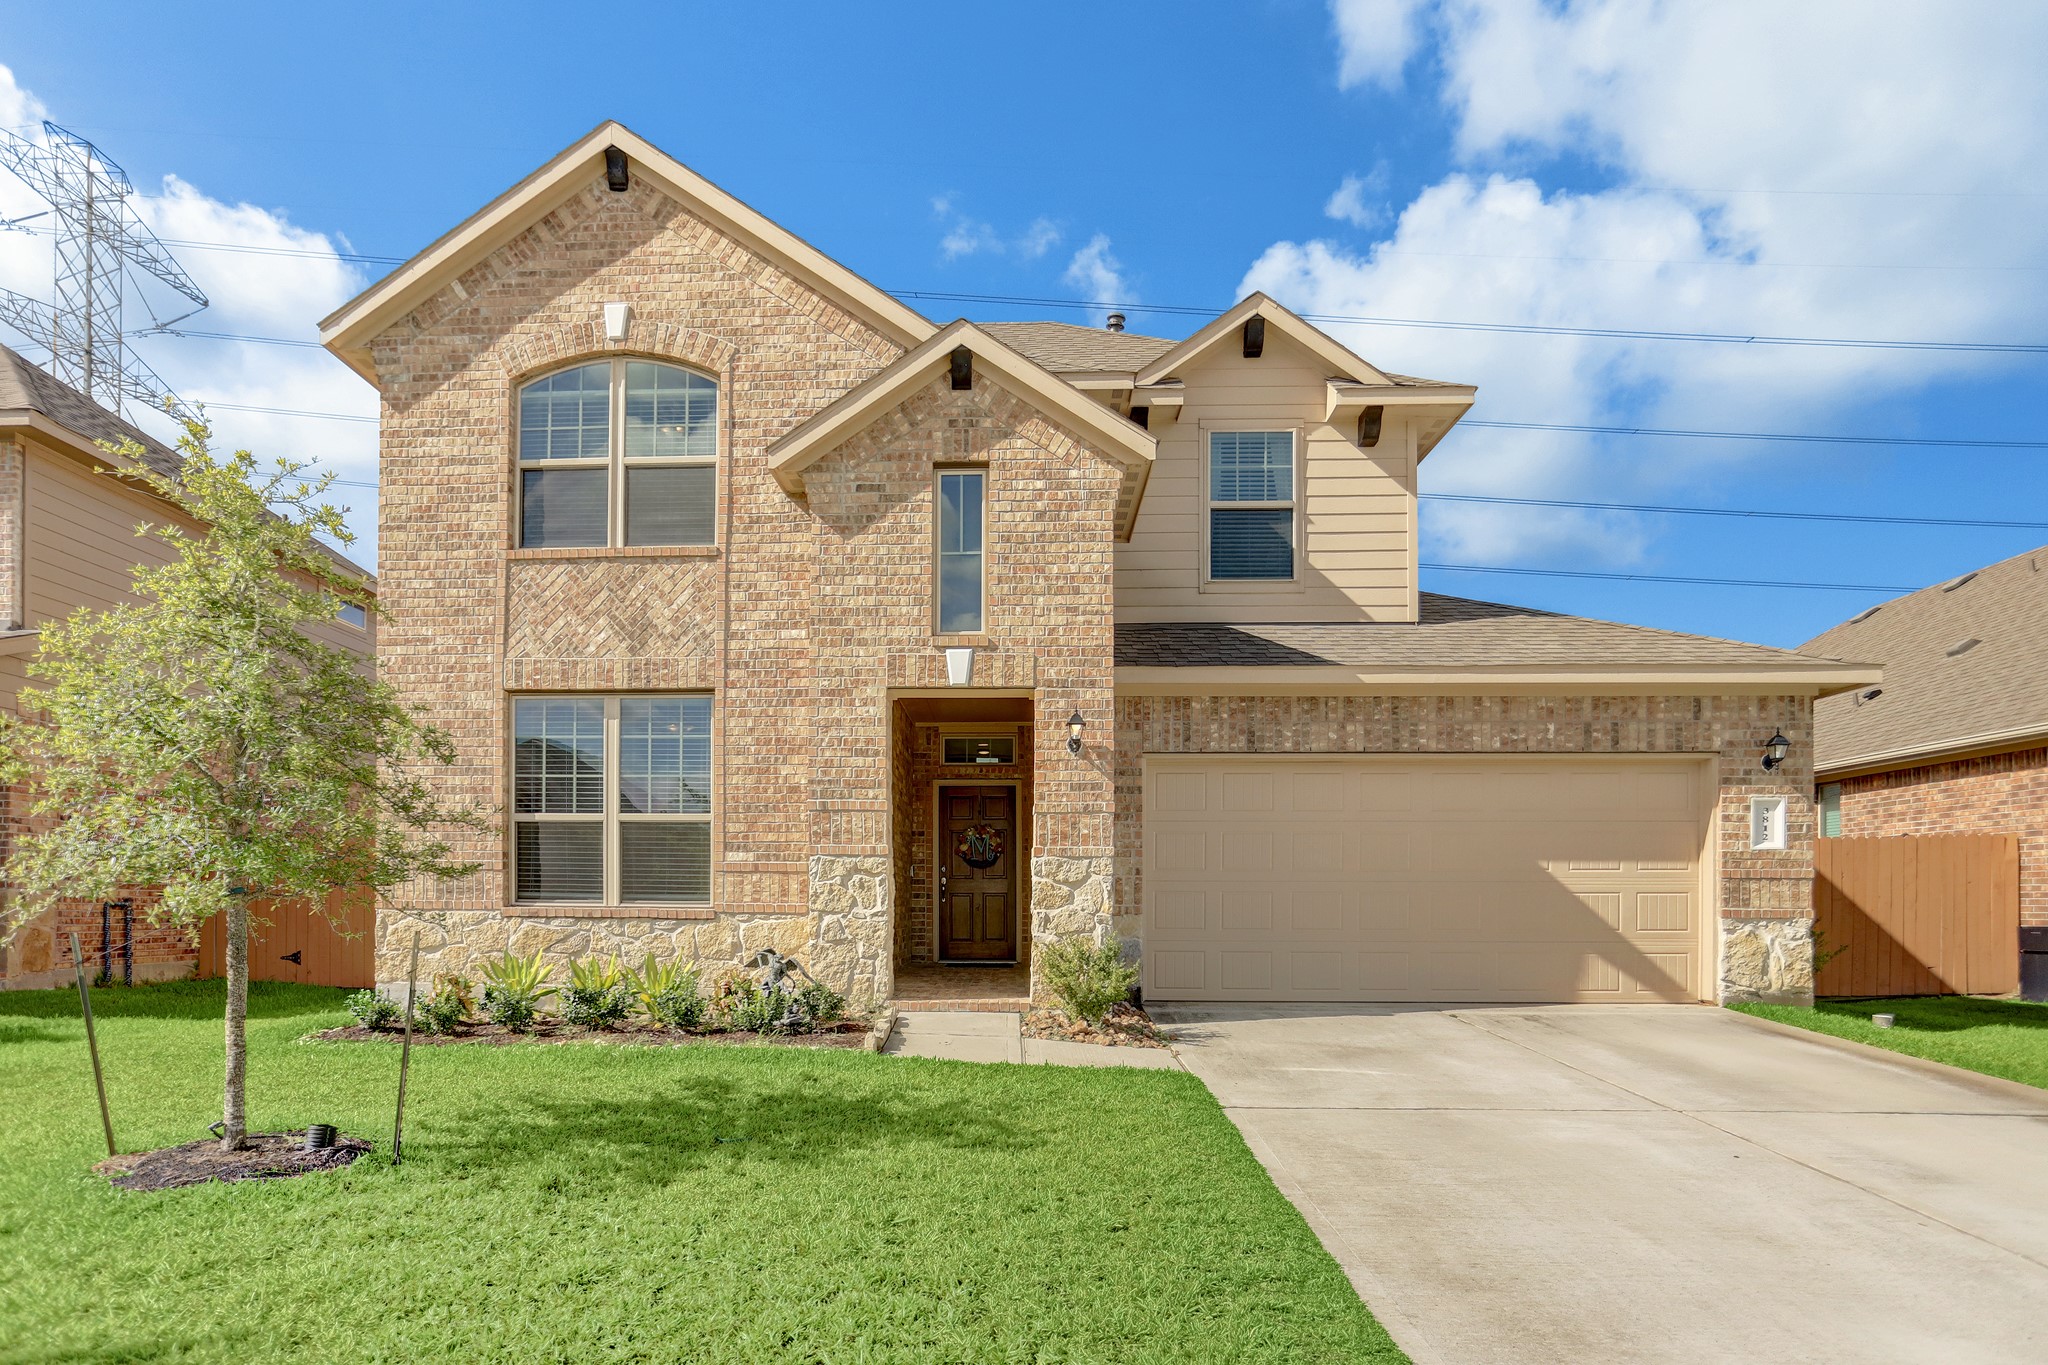 Beautiful recent construction home in sought after Villages at Harmony! This two story home offers 4 bedrooms, 3 baths, and spacious open floor plan.